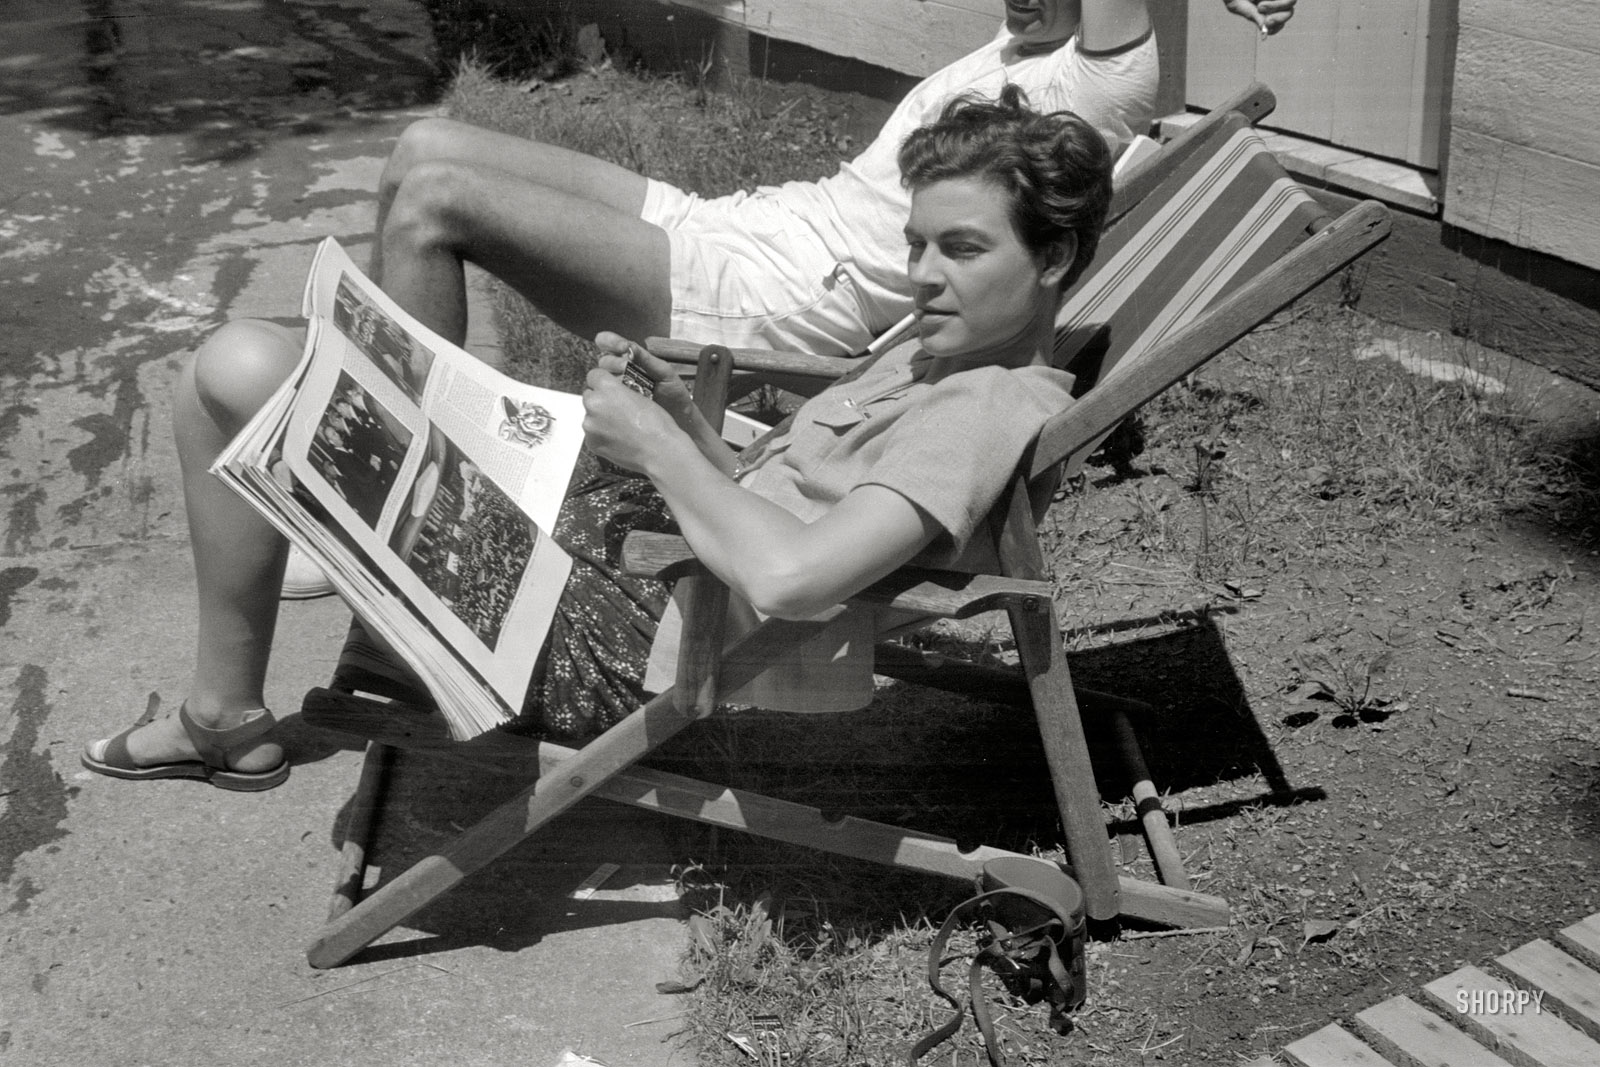 Another shot of someone who may or may not be Penny Vachon, perusing the February 1939 issue of Fortune. Photo by John Vachon. View full size.